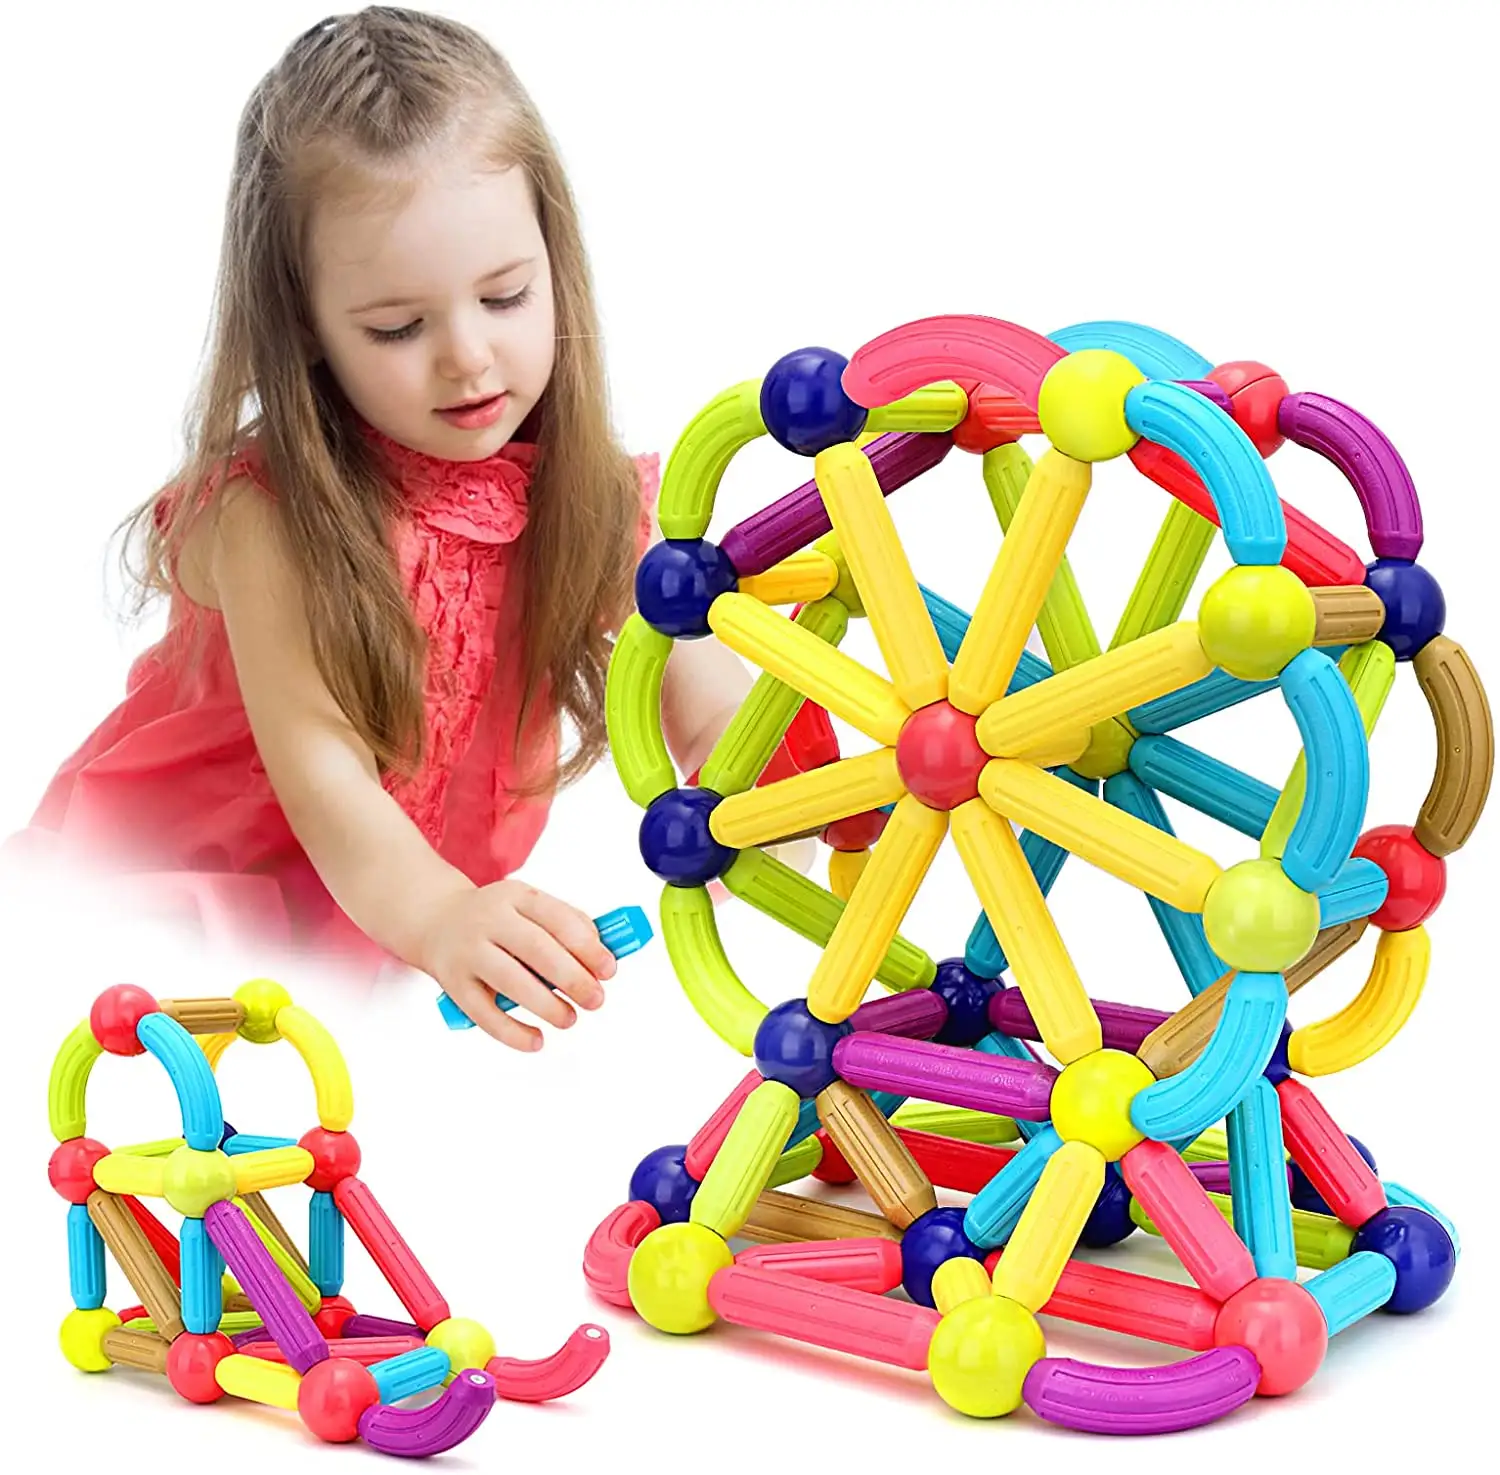 educational toy diy for Ages 3+ Children toy magnet balls and rod set magnetic building block toy